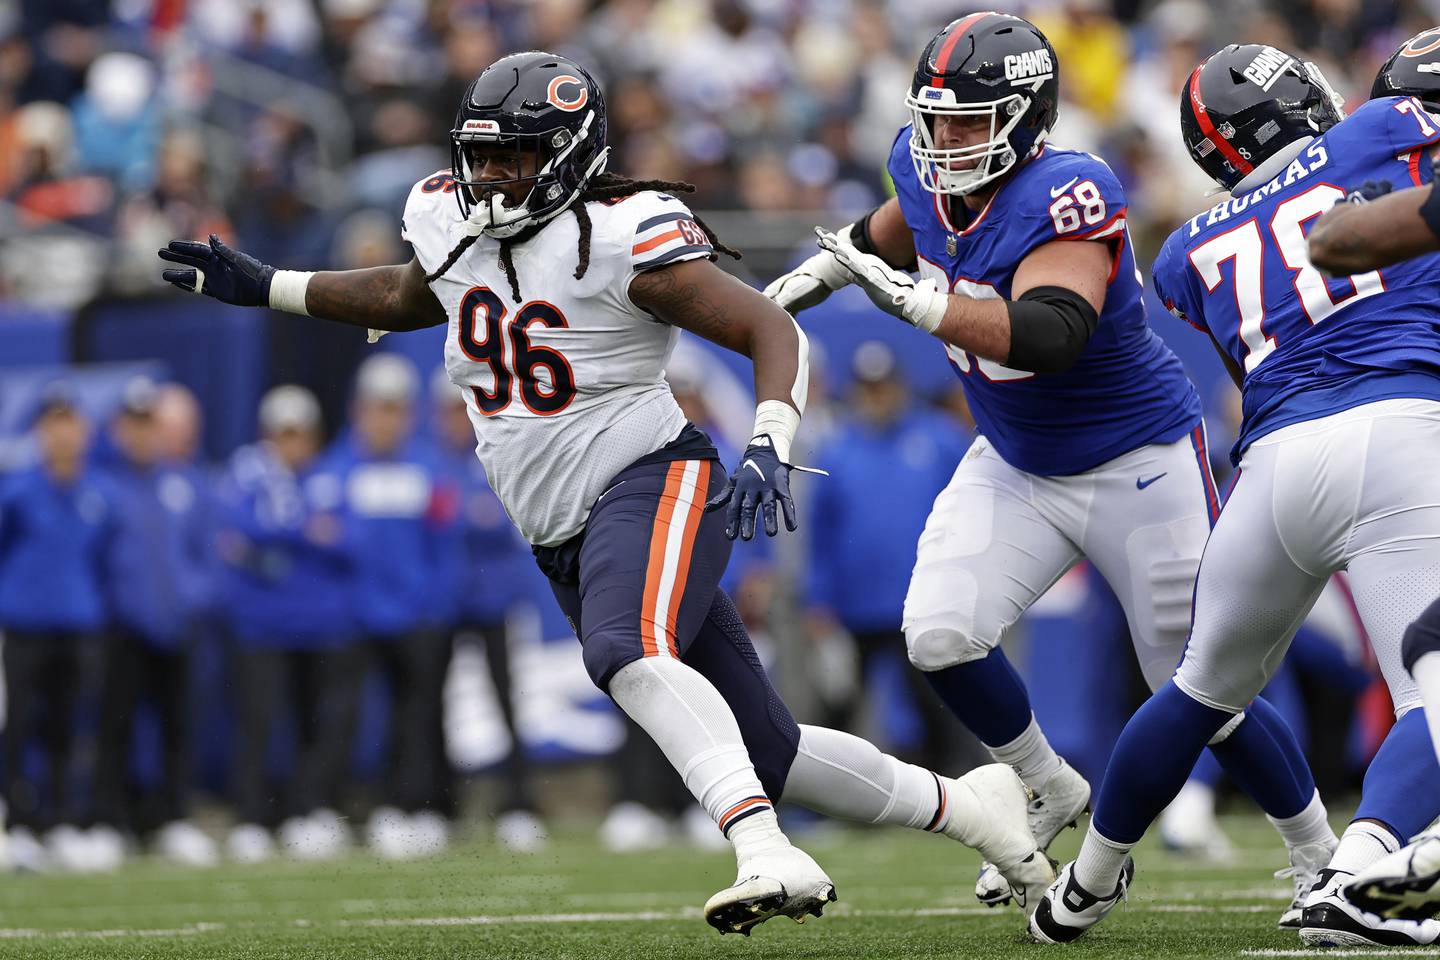 Bears defensive tackle Armon Watts rushes against the Giants during a game on Oct. 2, 2022.